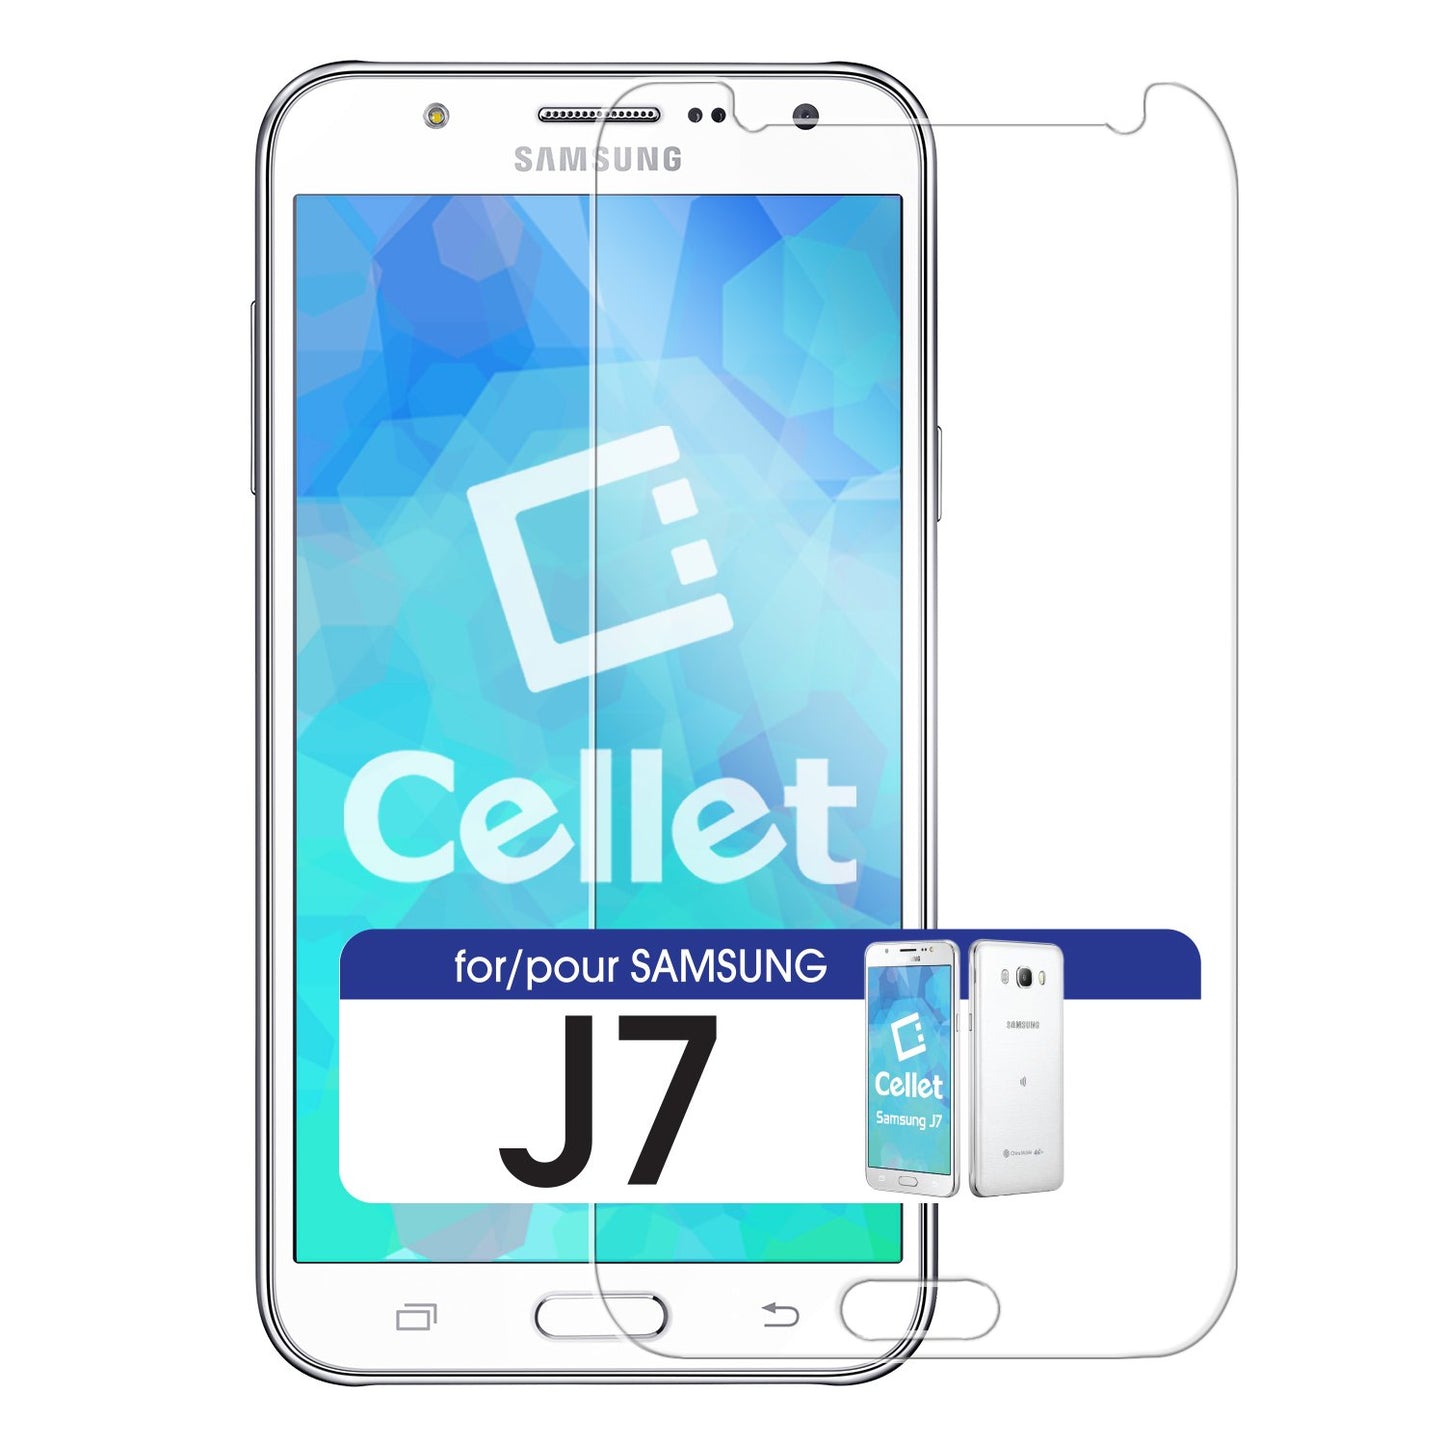 SGSAMJ7 - Samsung J7 Protector, Premium Ultra-Thin Tempered Glass Screen Protector for Samsung J7 (0.3mm) by Cellet